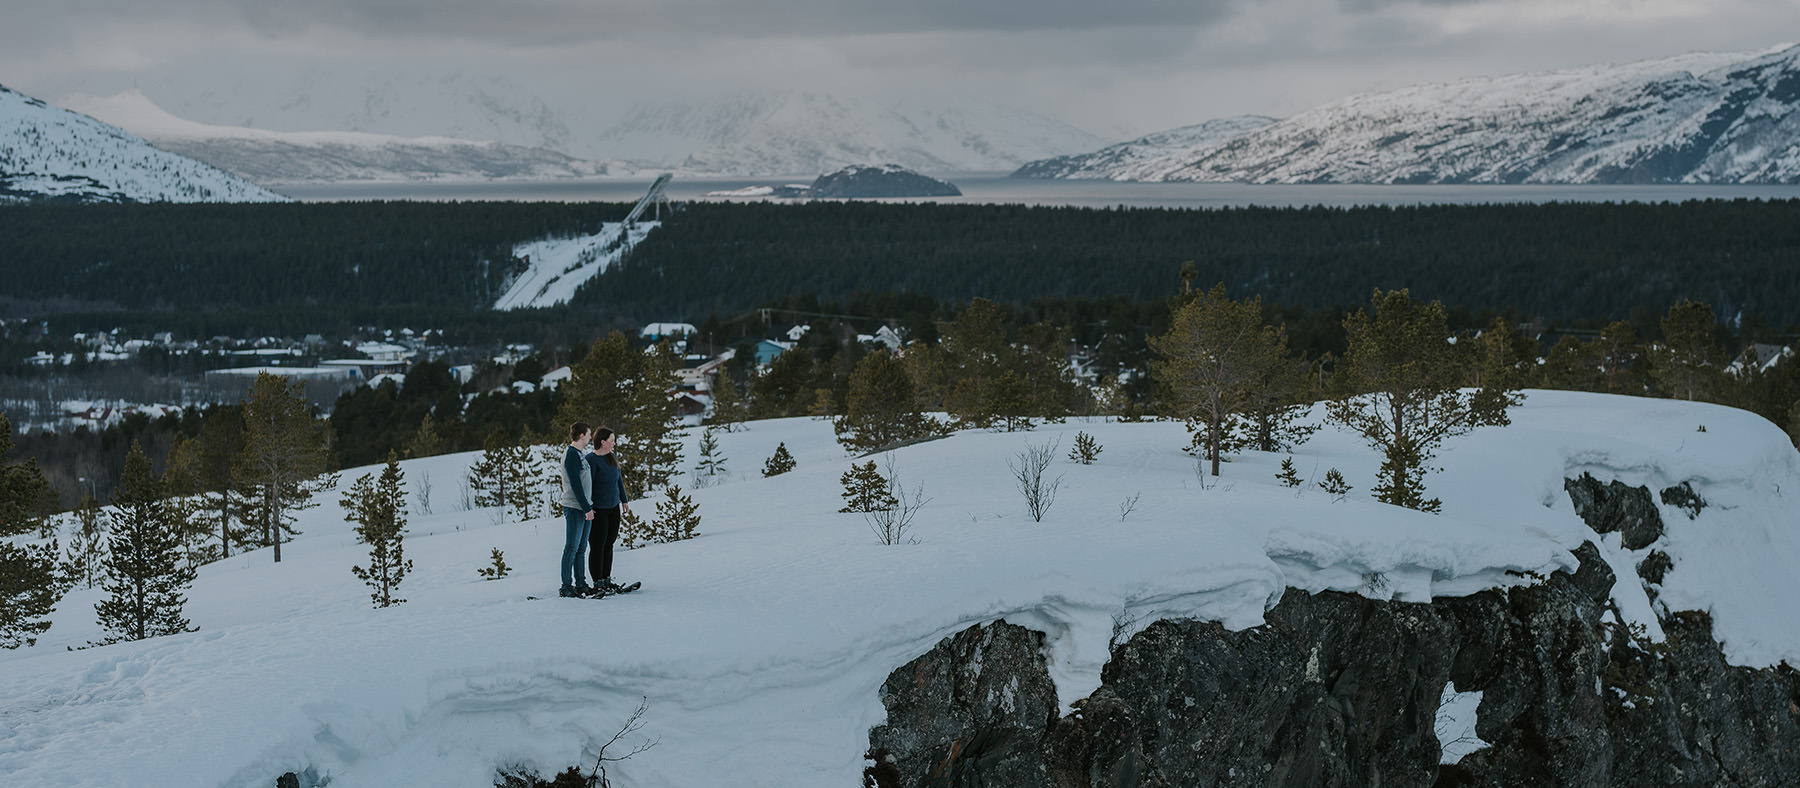 Snowshoeing engagament photo session in the hills of Alta Norway captured by Norway wedding photographer TS Foto Design